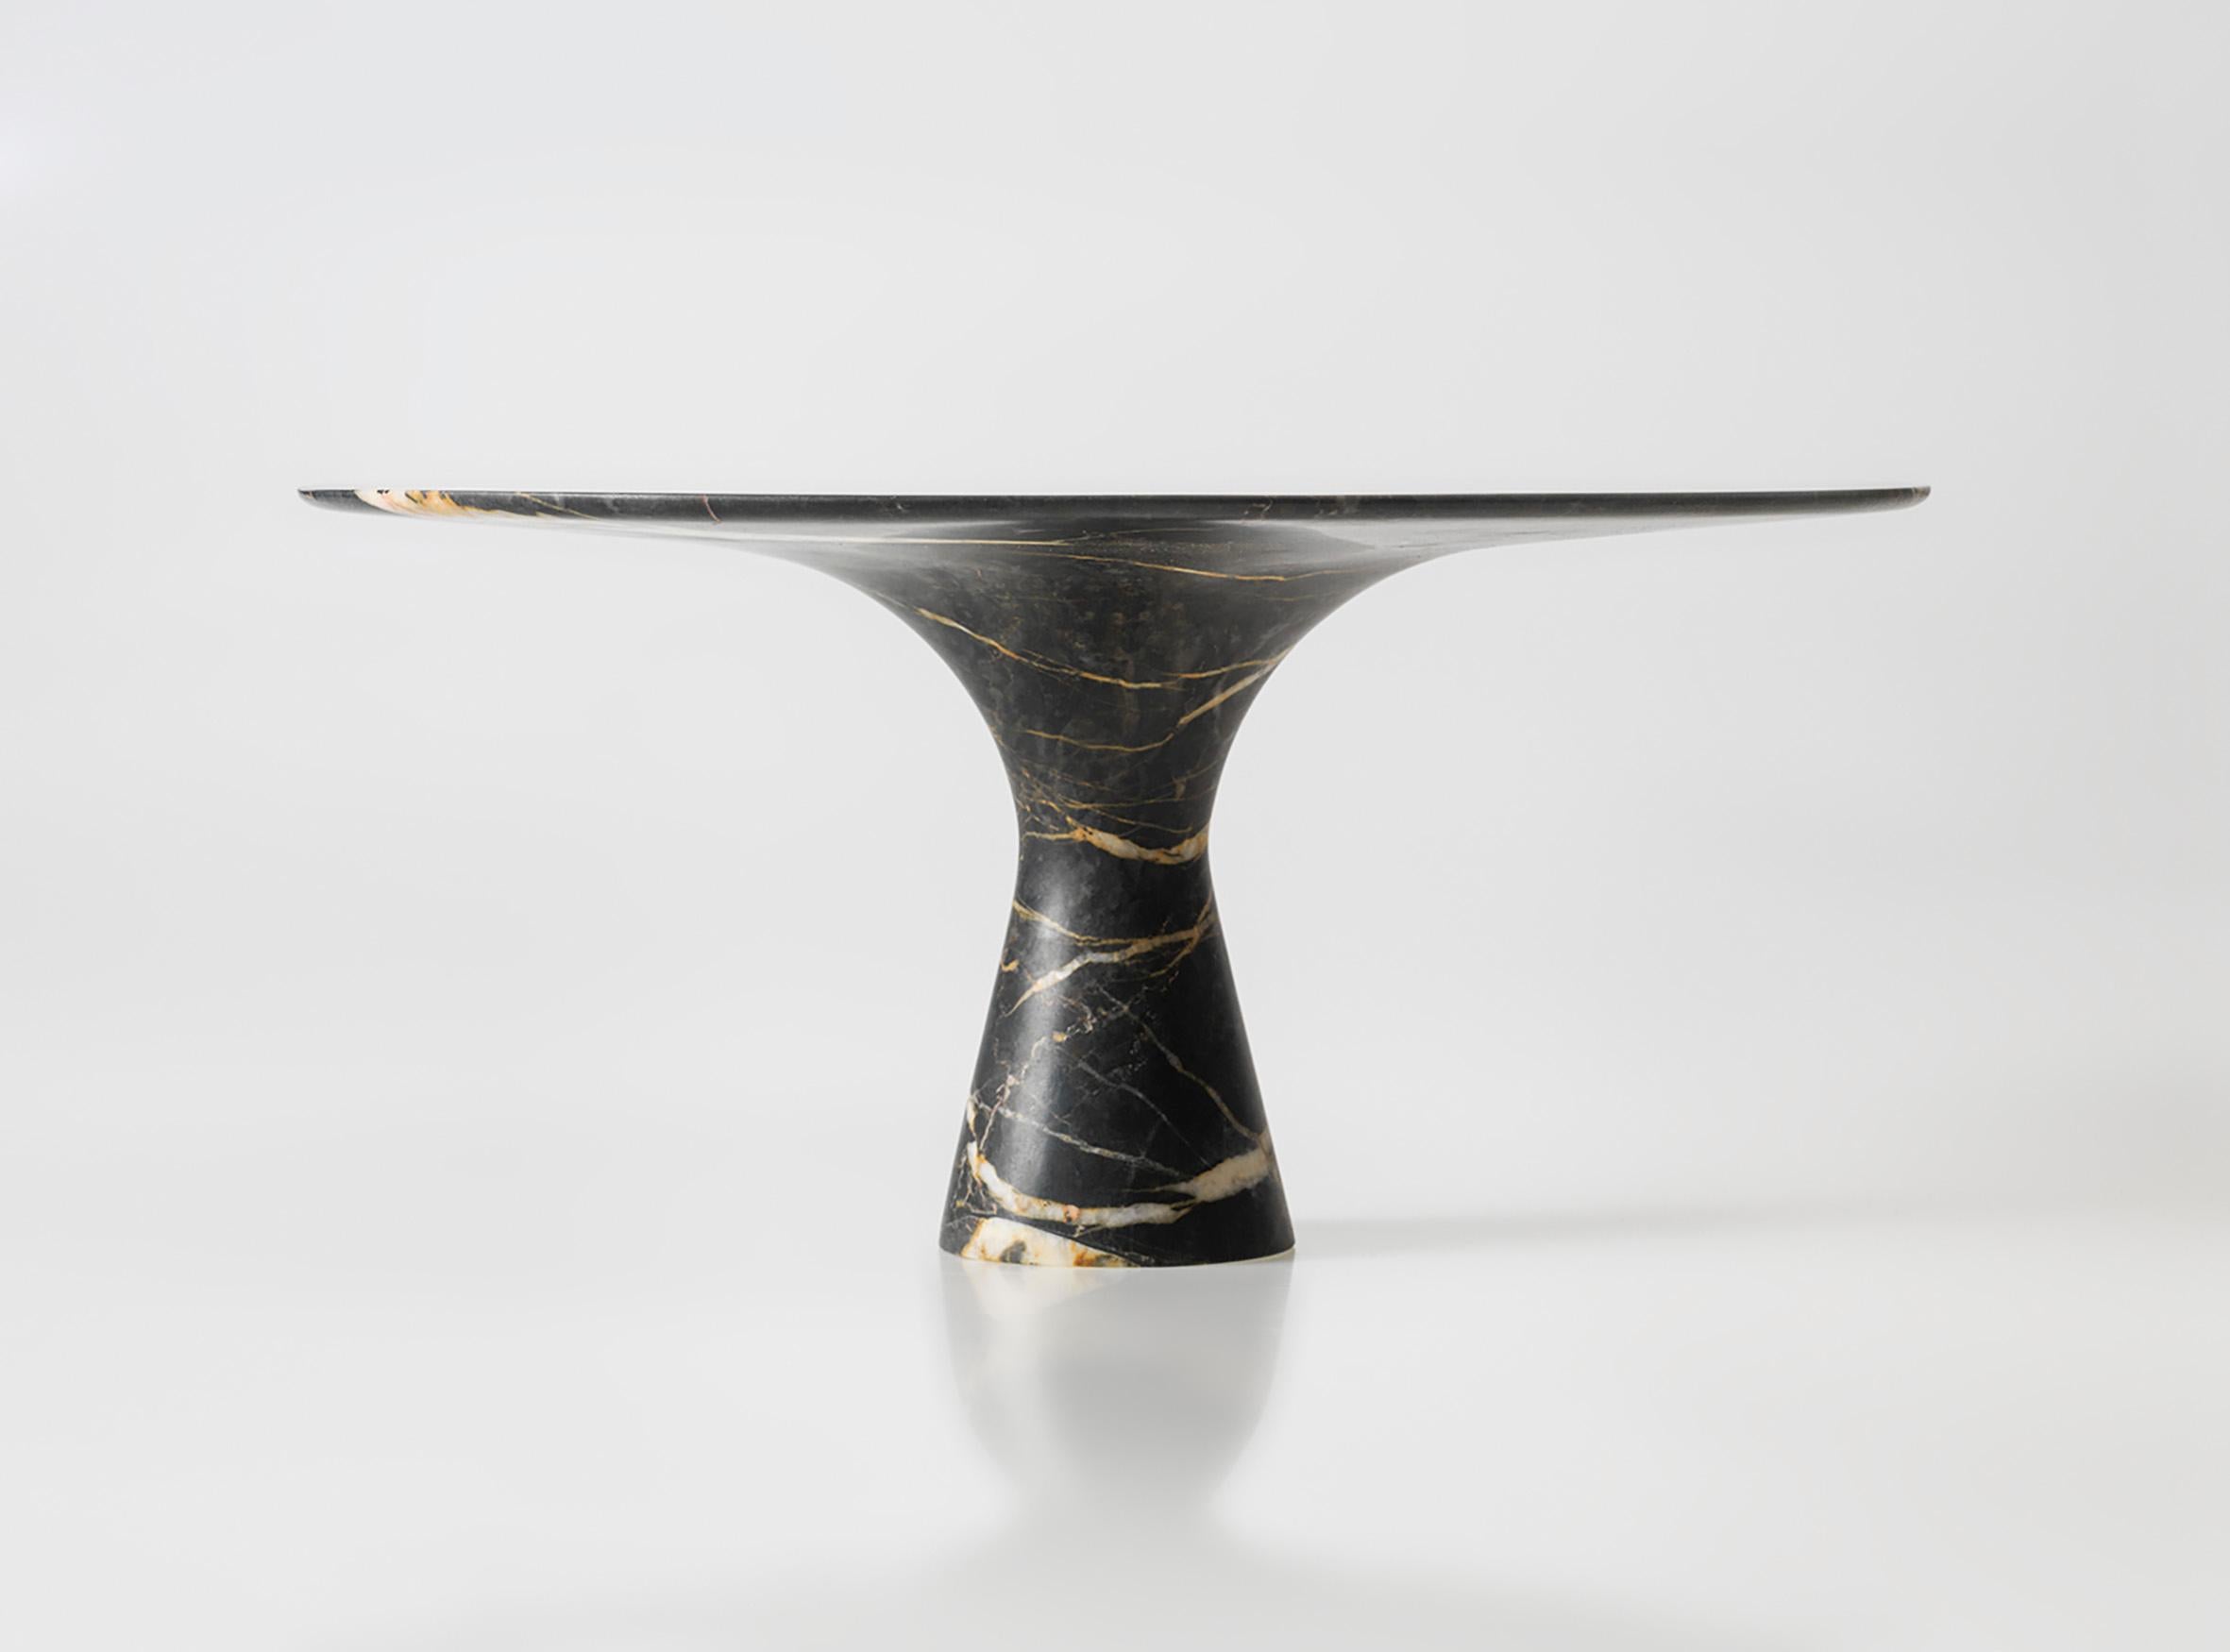 Port Saint Laurent Refined Contemporary Marble Oval Table 210/75
Dimensions: 210 x 135 x 75 cm
Materials: Port Saint Laurent marble.

Angelo is the essence of a round table in natural stone, a sculptural shape in robust material with elegant lines